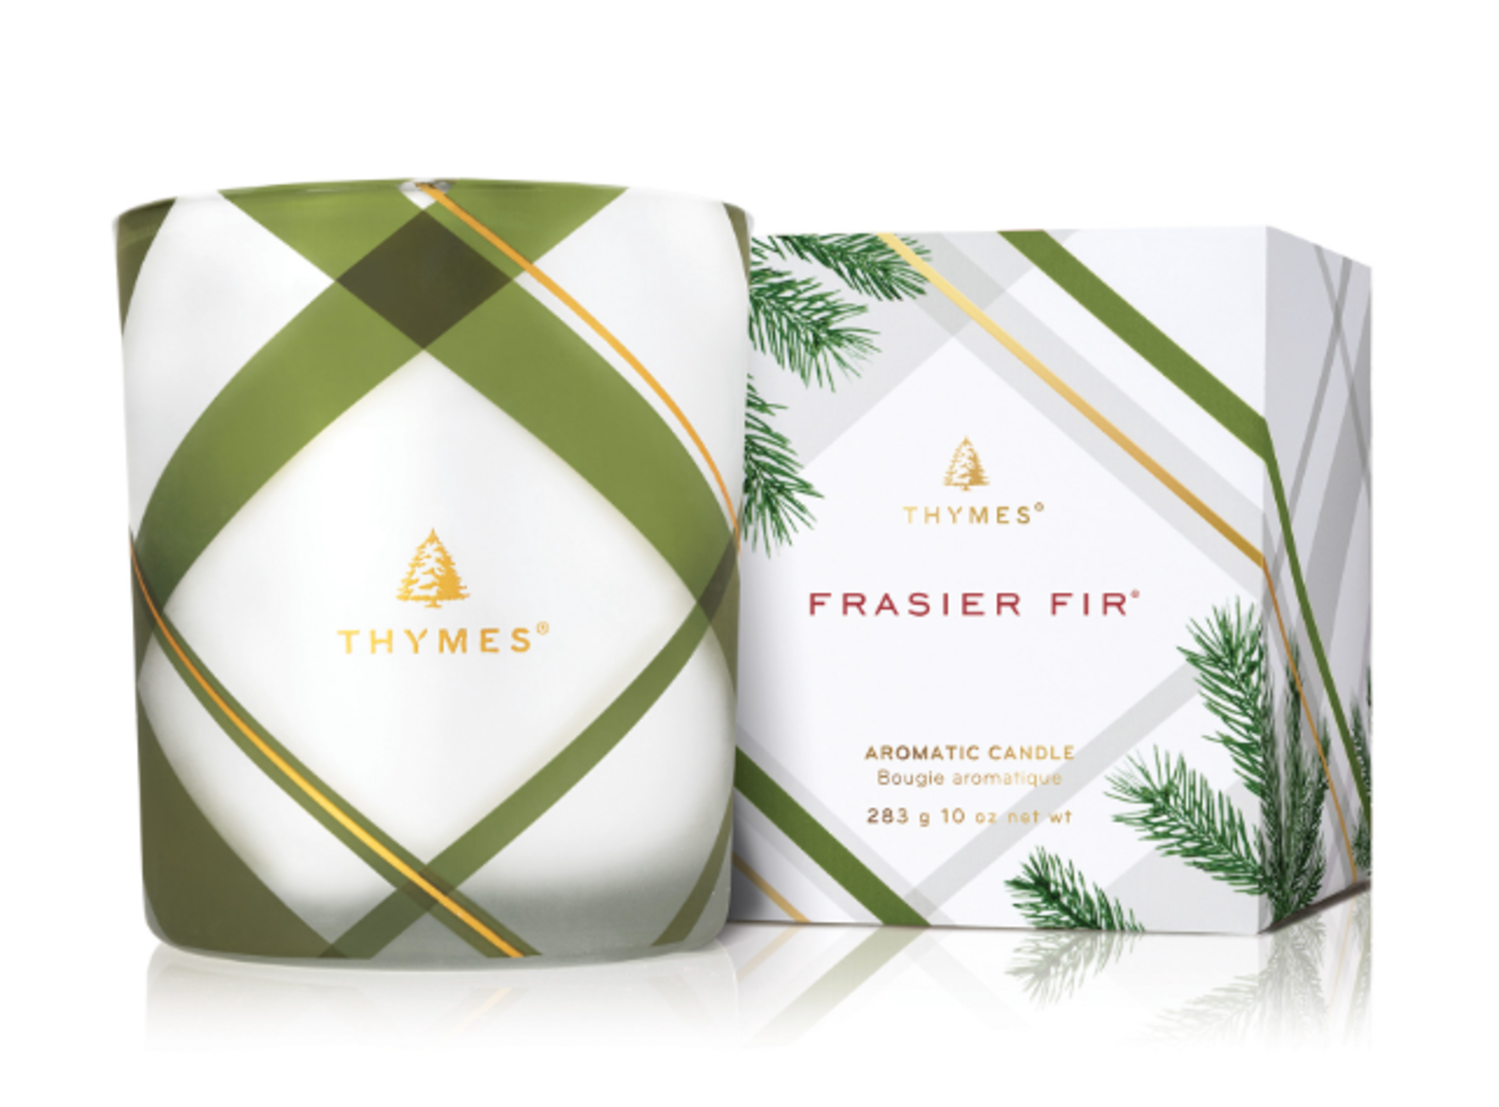 THYMES FROSTED PLAID MEDIUM CANDLE / 03545242500 - Curated Home